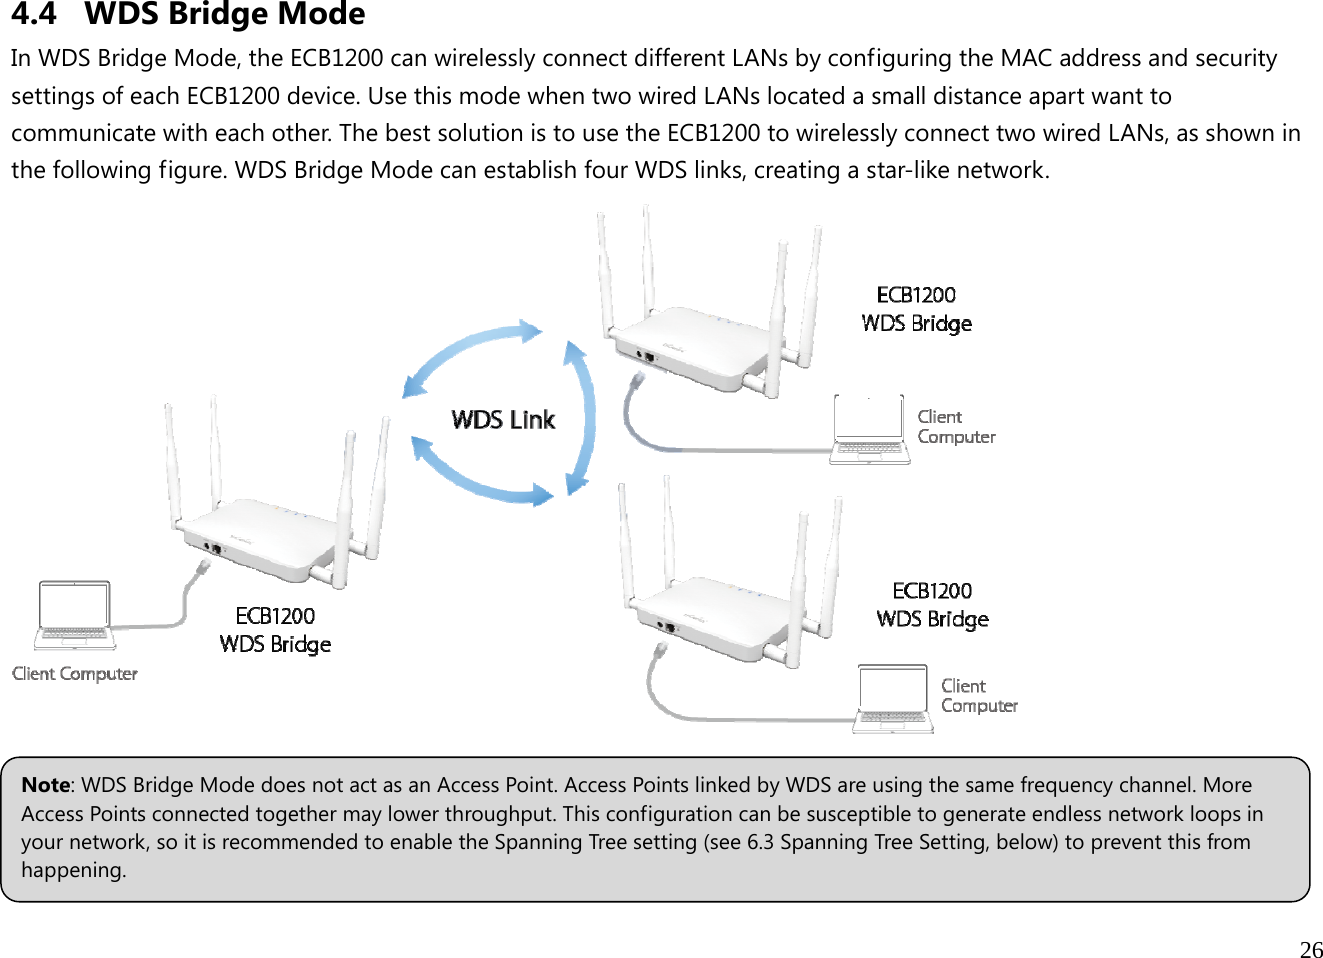  26  4.4 WDS Bridge Mode In WDS Bridge Mode, the ECB1200 can wirelessly connect different LANs by configuring the MAC address and security settings of each ECB1200 device. Use this mode when two wired LANs located a small distance apart want to communicate with each other. The best solution is to use the ECB1200 to wirelessly connect two wired LANs, as shown in the following figure. WDS Bridge Mode can establish four WDS links, creating a star-like network.       Note: WDS Bridge Mode does not act as an Access Point. Access Points linked by WDS are using the same frequency channel. More Access Points connected together may lower throughput. This configuration can be susceptible to generate endless network loops in your network, so it is recommended to enable the Spanning Tree setting (see 6.3 Spanning Tree Setting, below) to prevent this from happening. 